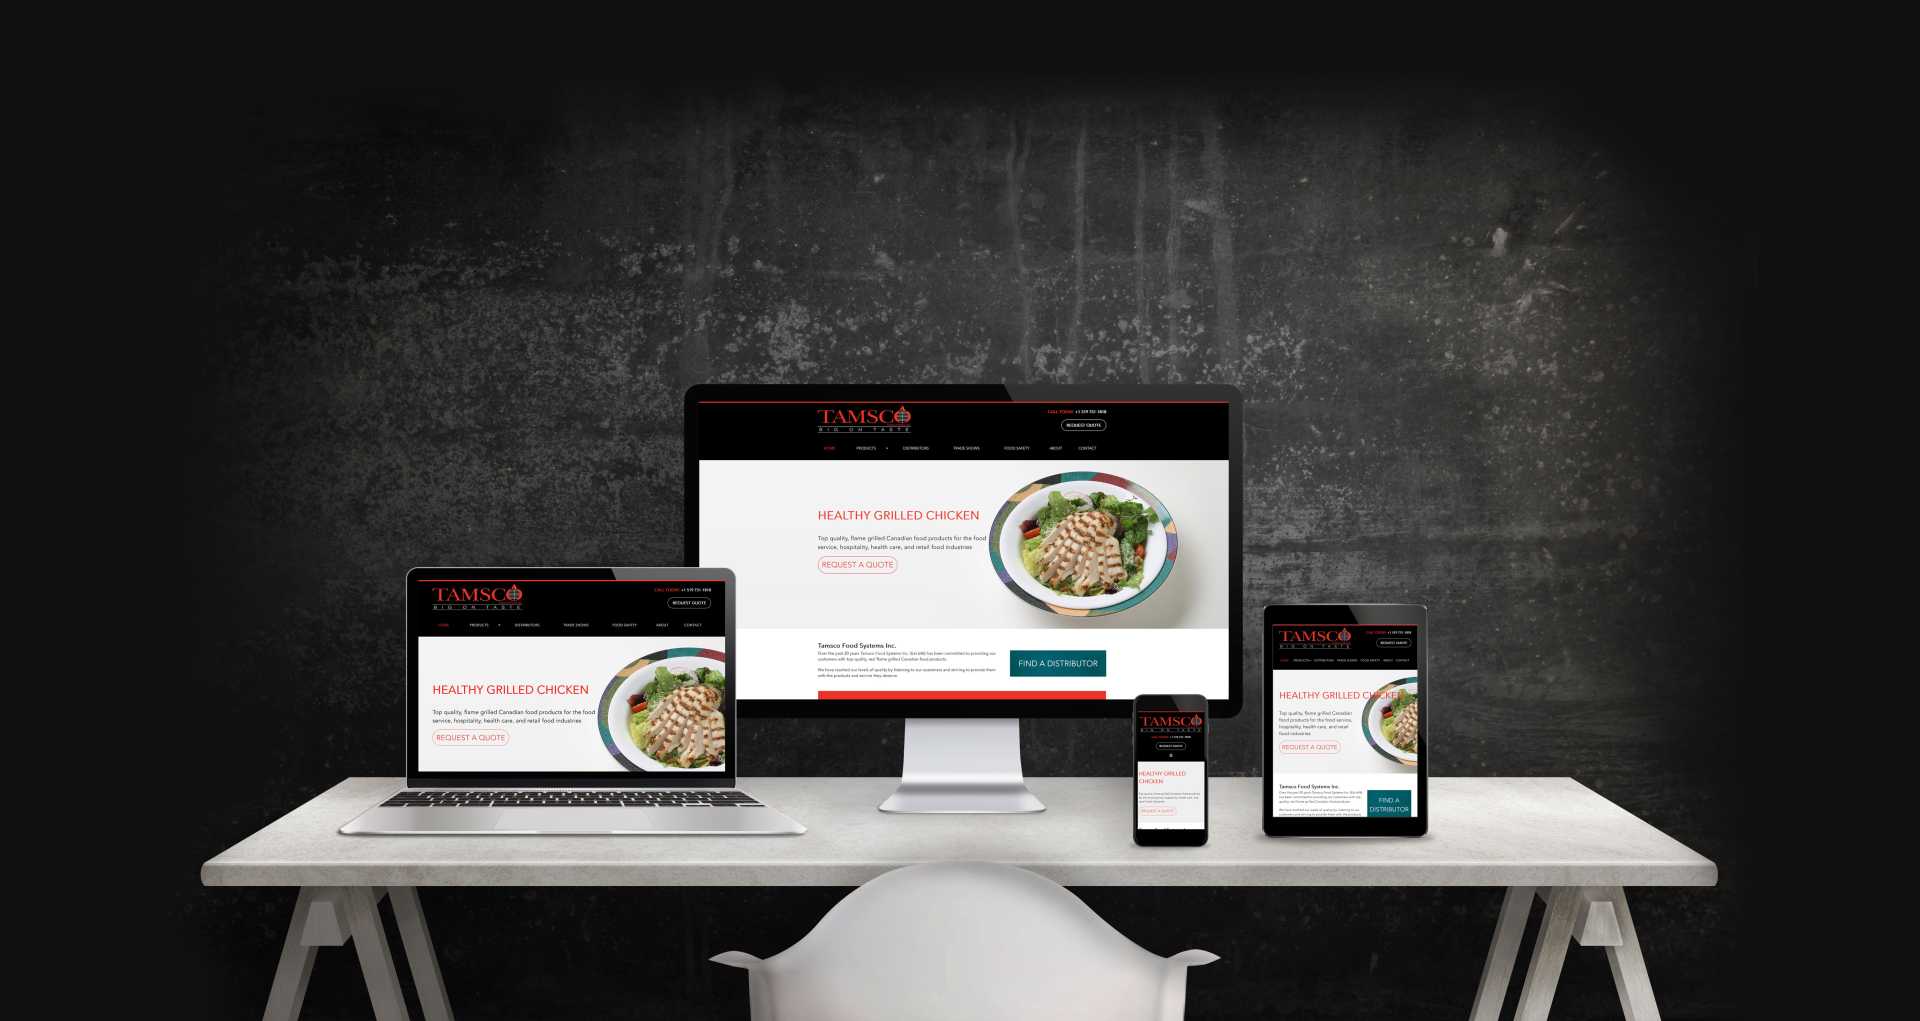 Mockup of Tamsco Food Systems website showing desktop and mobile views.